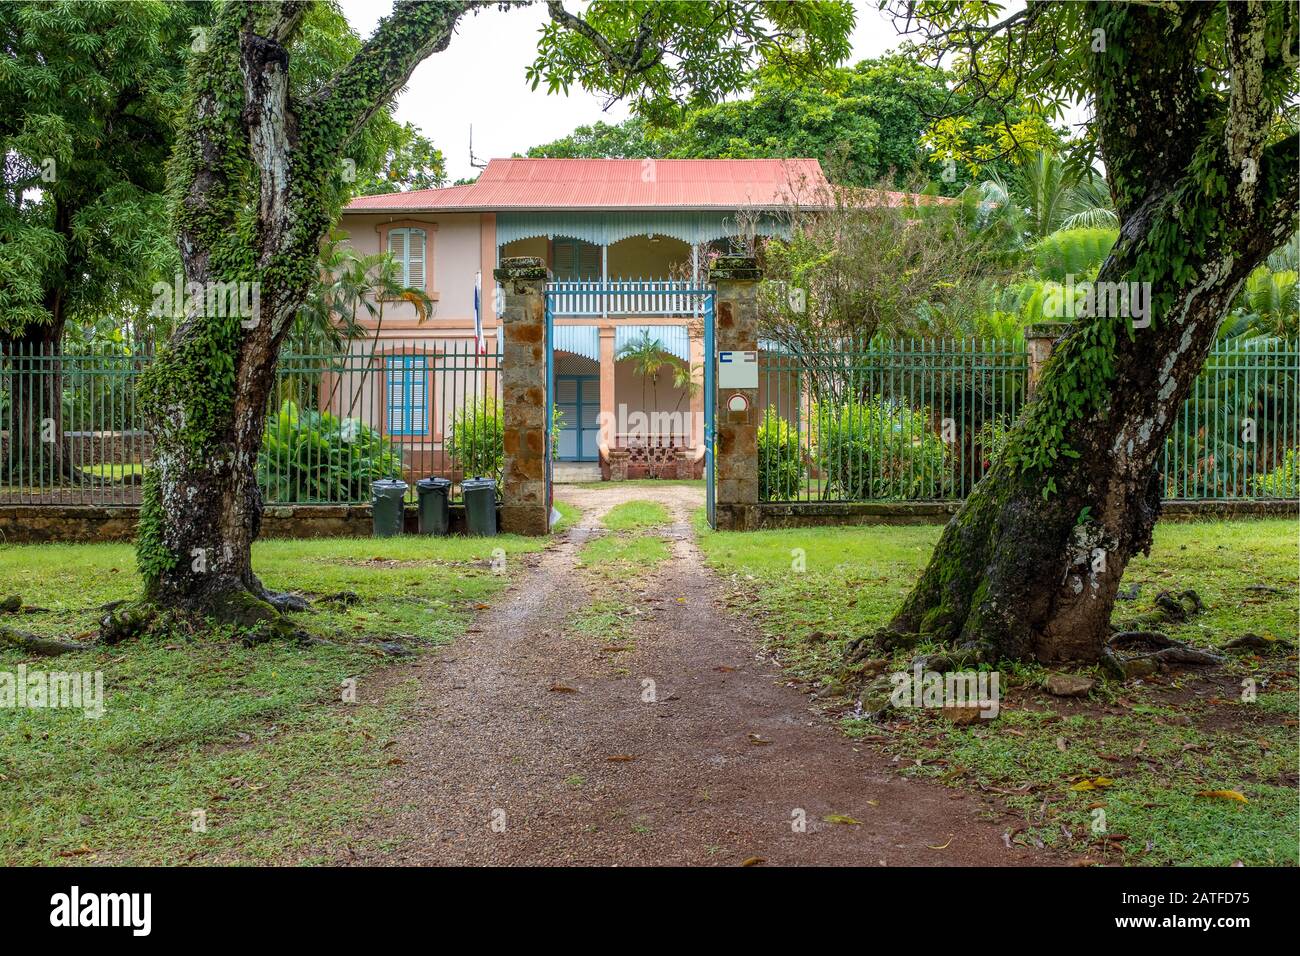 Administrative building of abandoned penal colony or jail on Salvation's Islands, taken on an overcast day with no people, French Guiana Stock Photo